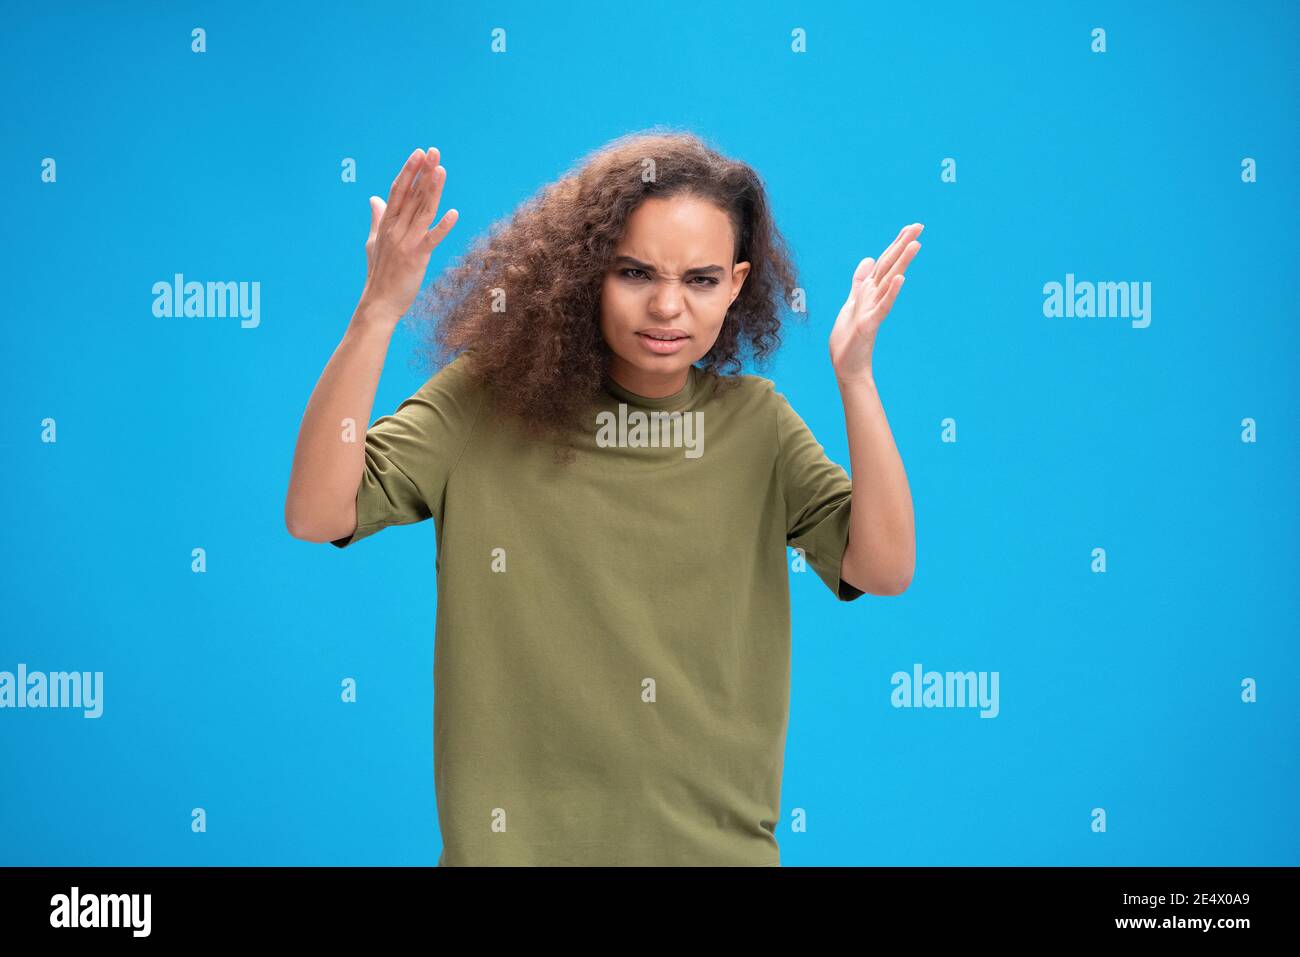 Angry african American girl lifted her hands up looking disappointedly at camera wearing olive t-shirt isolated on blue background. Human emotions Stock Photo